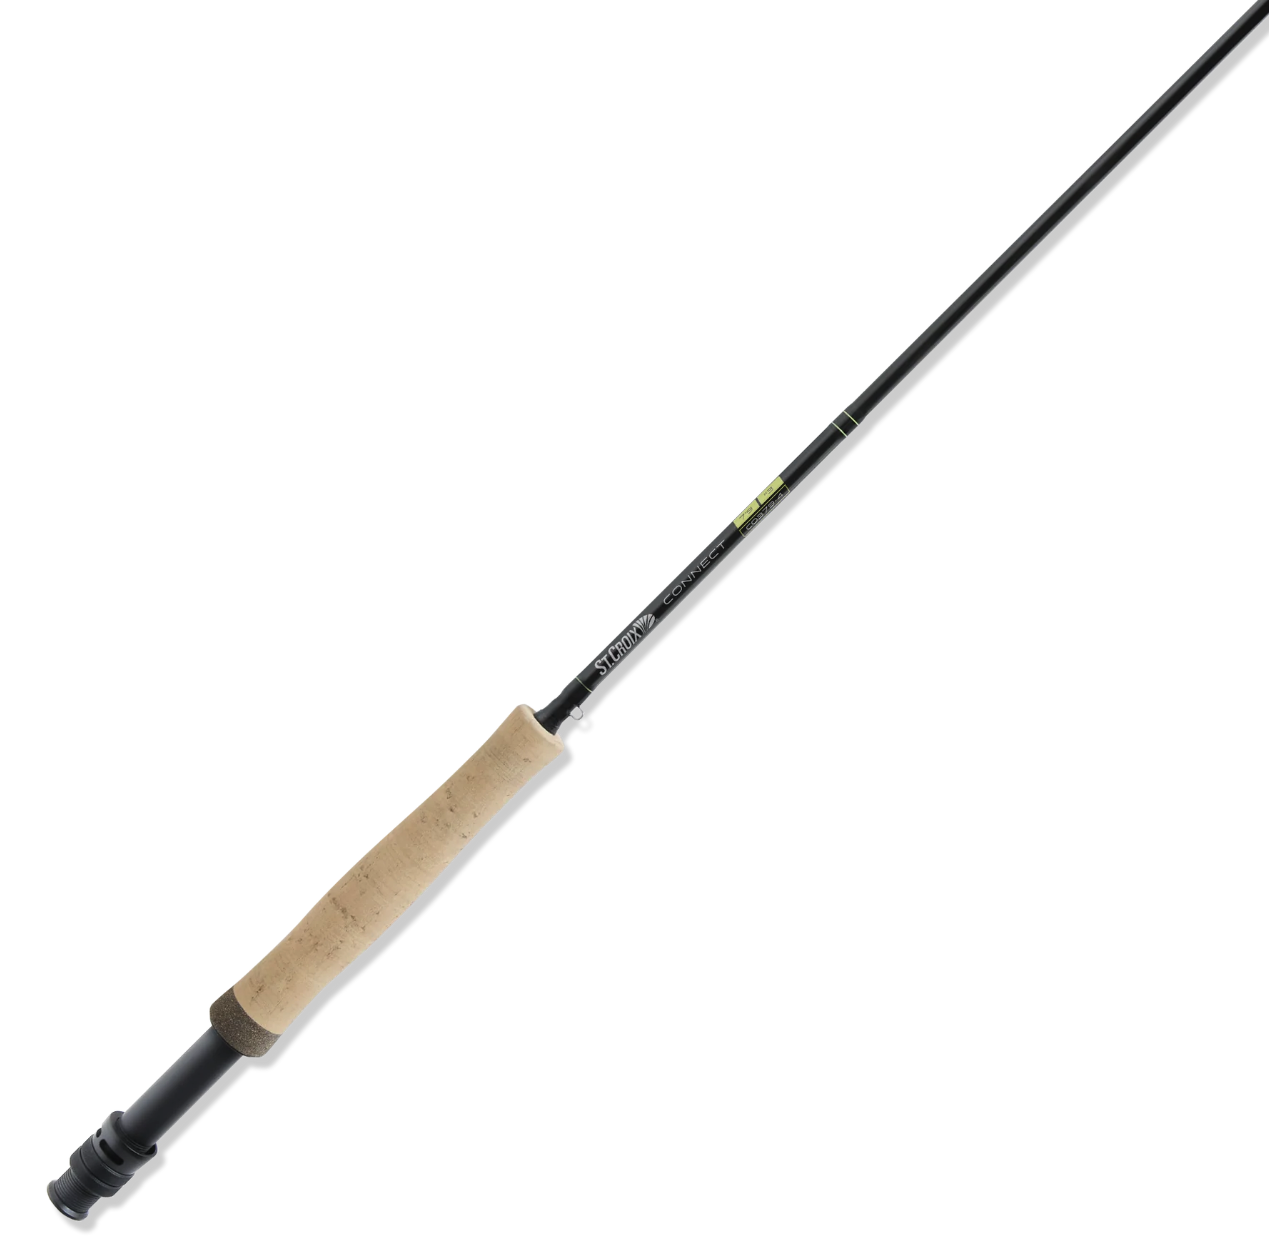 St. Croix Connect Fly Rod, designed for unmatched versatility and performance in diverse fly fishing environments